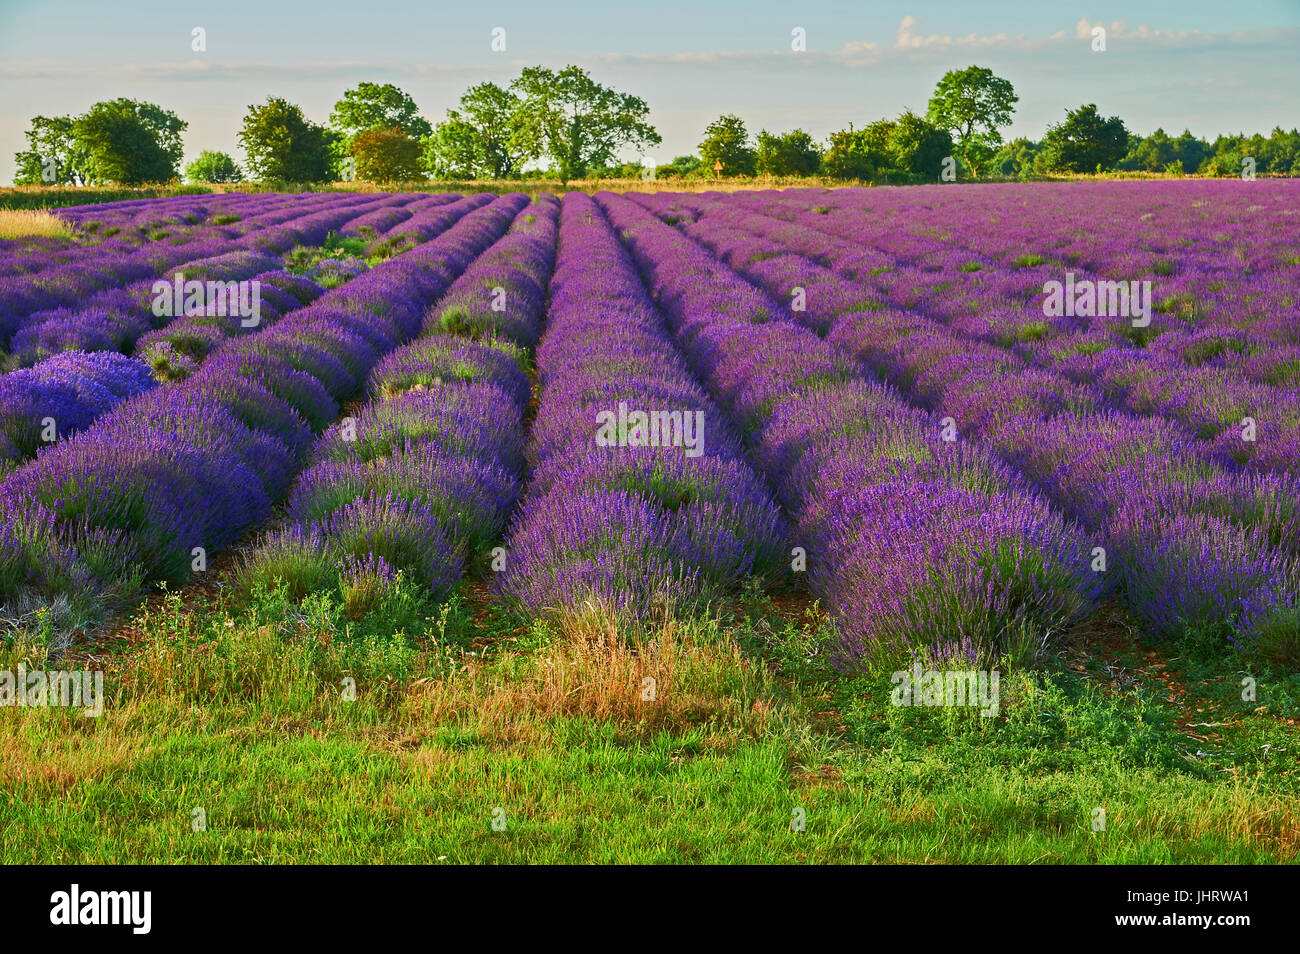 Lavender field in the Cotswolds, England, near the village of Snowshill, Gloucestershire Stock Photo